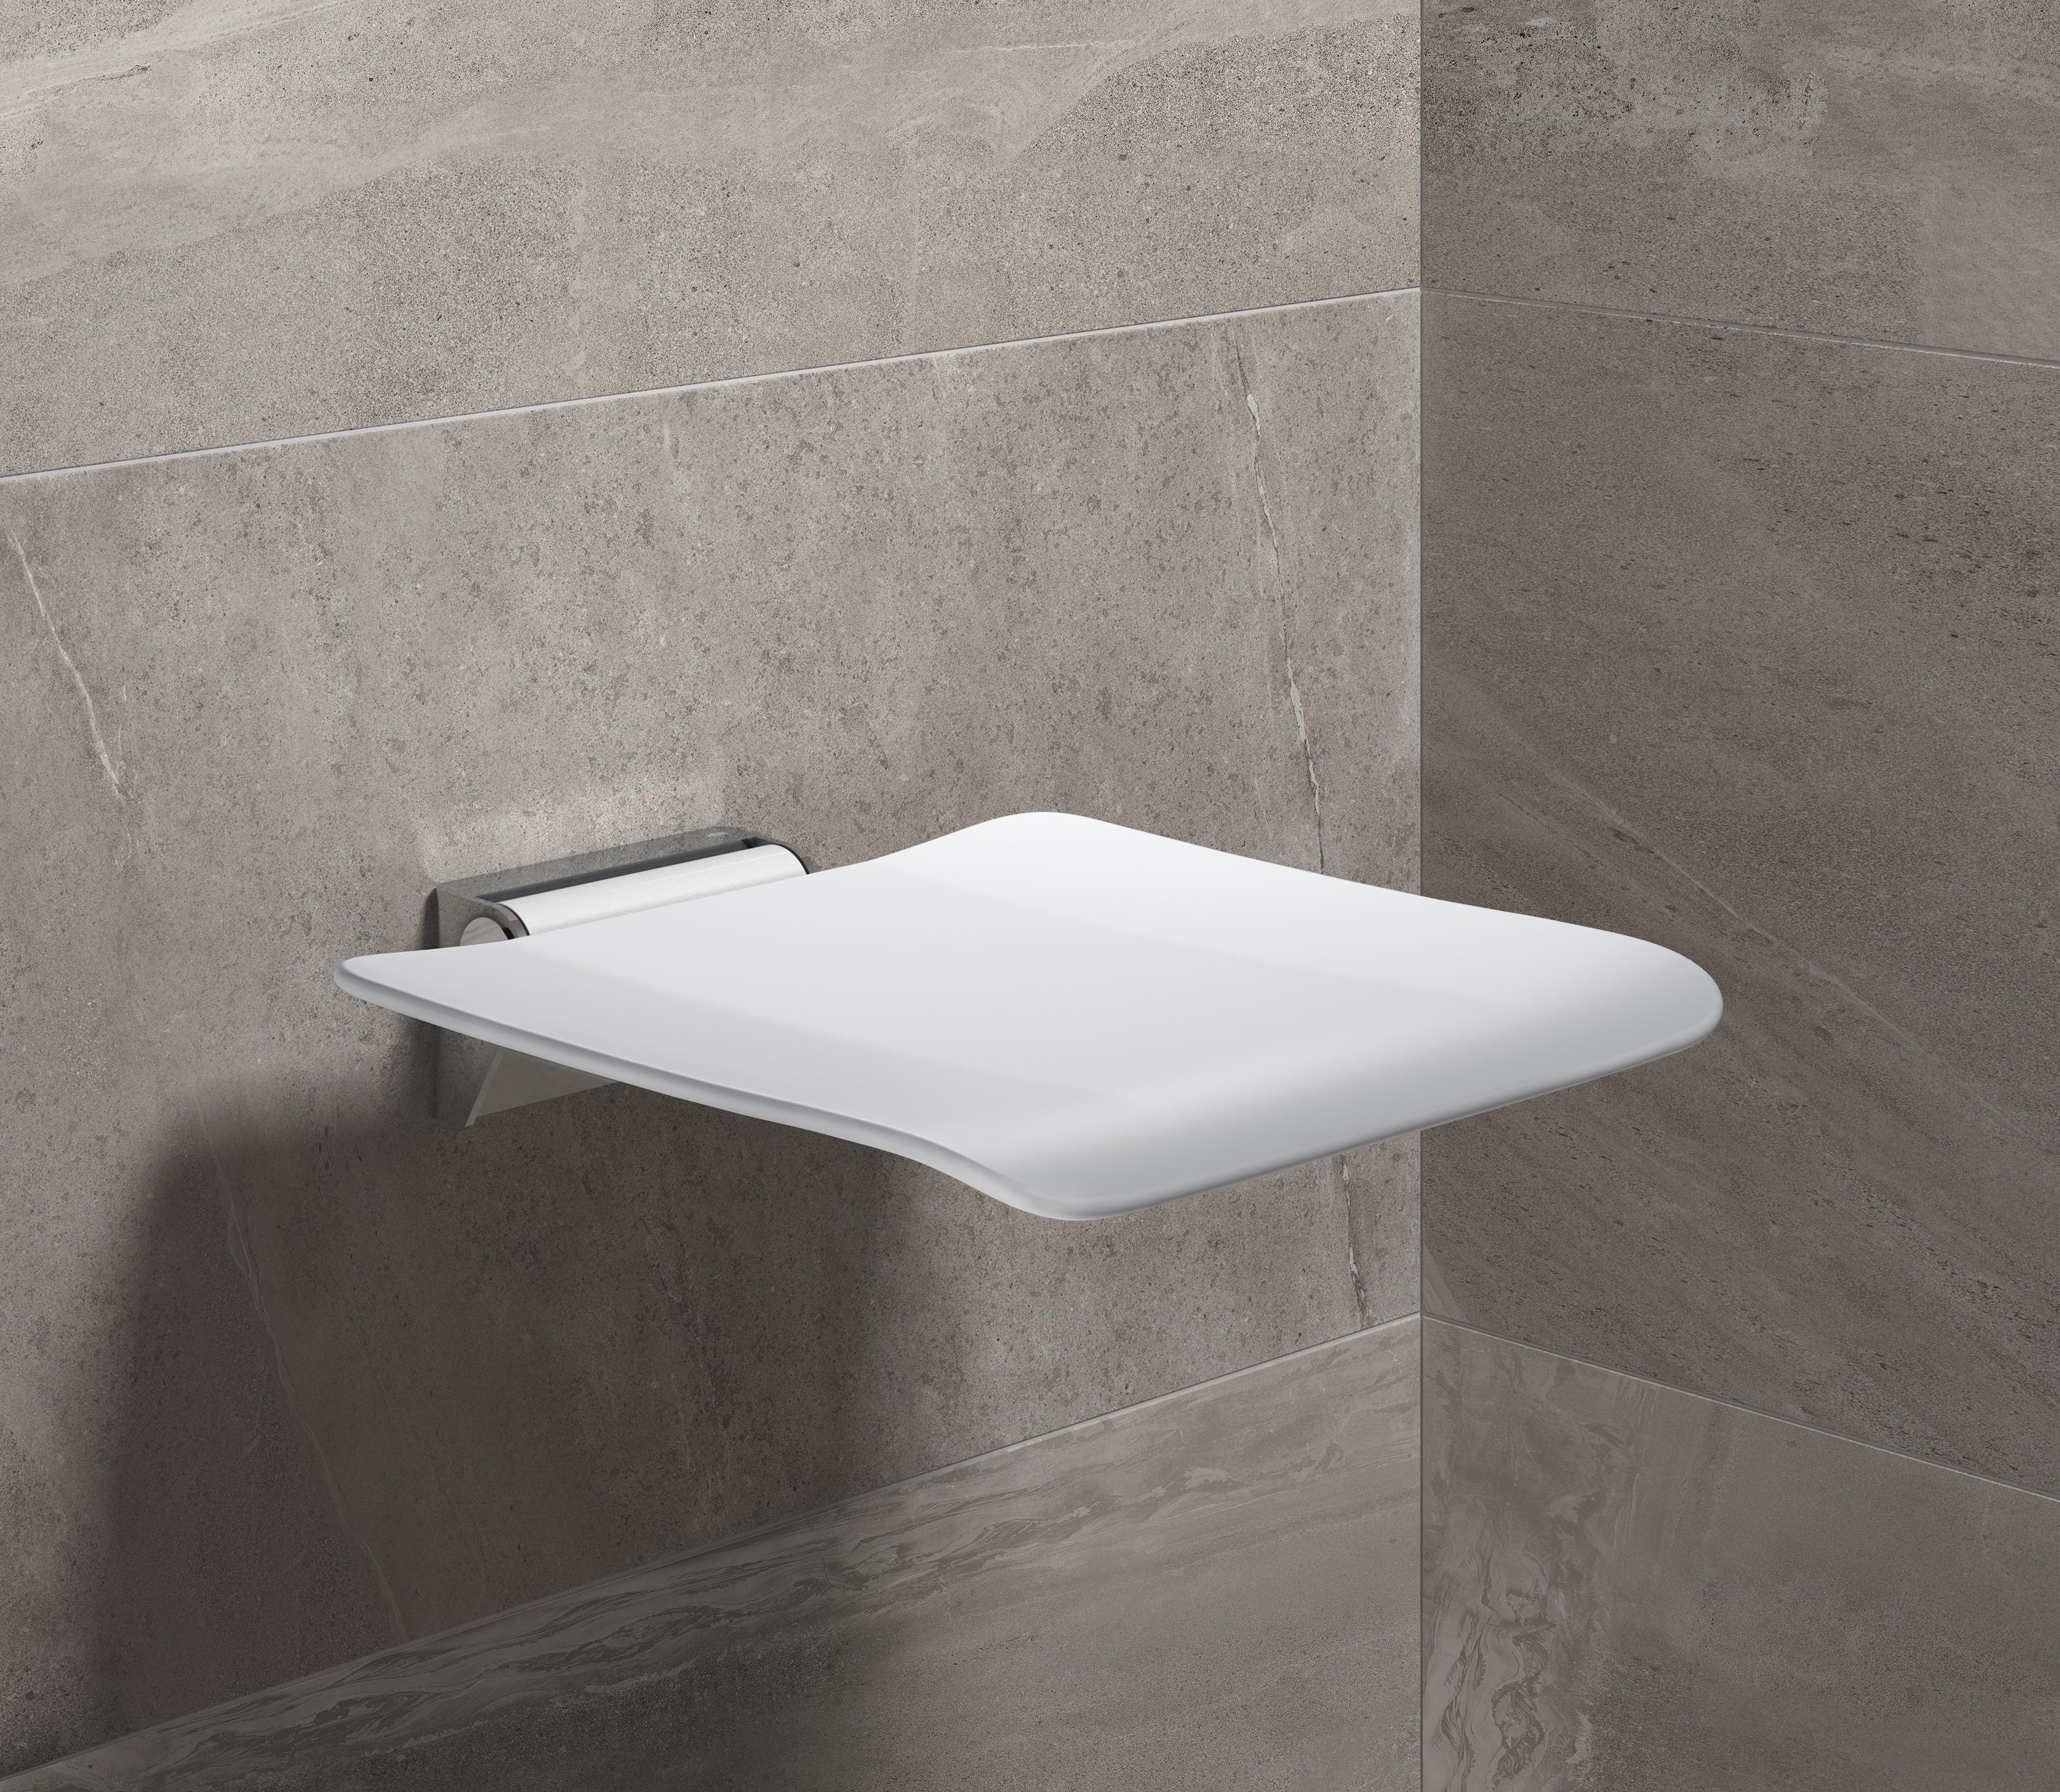 Hewi System 900 Shower Seat and Support Rails